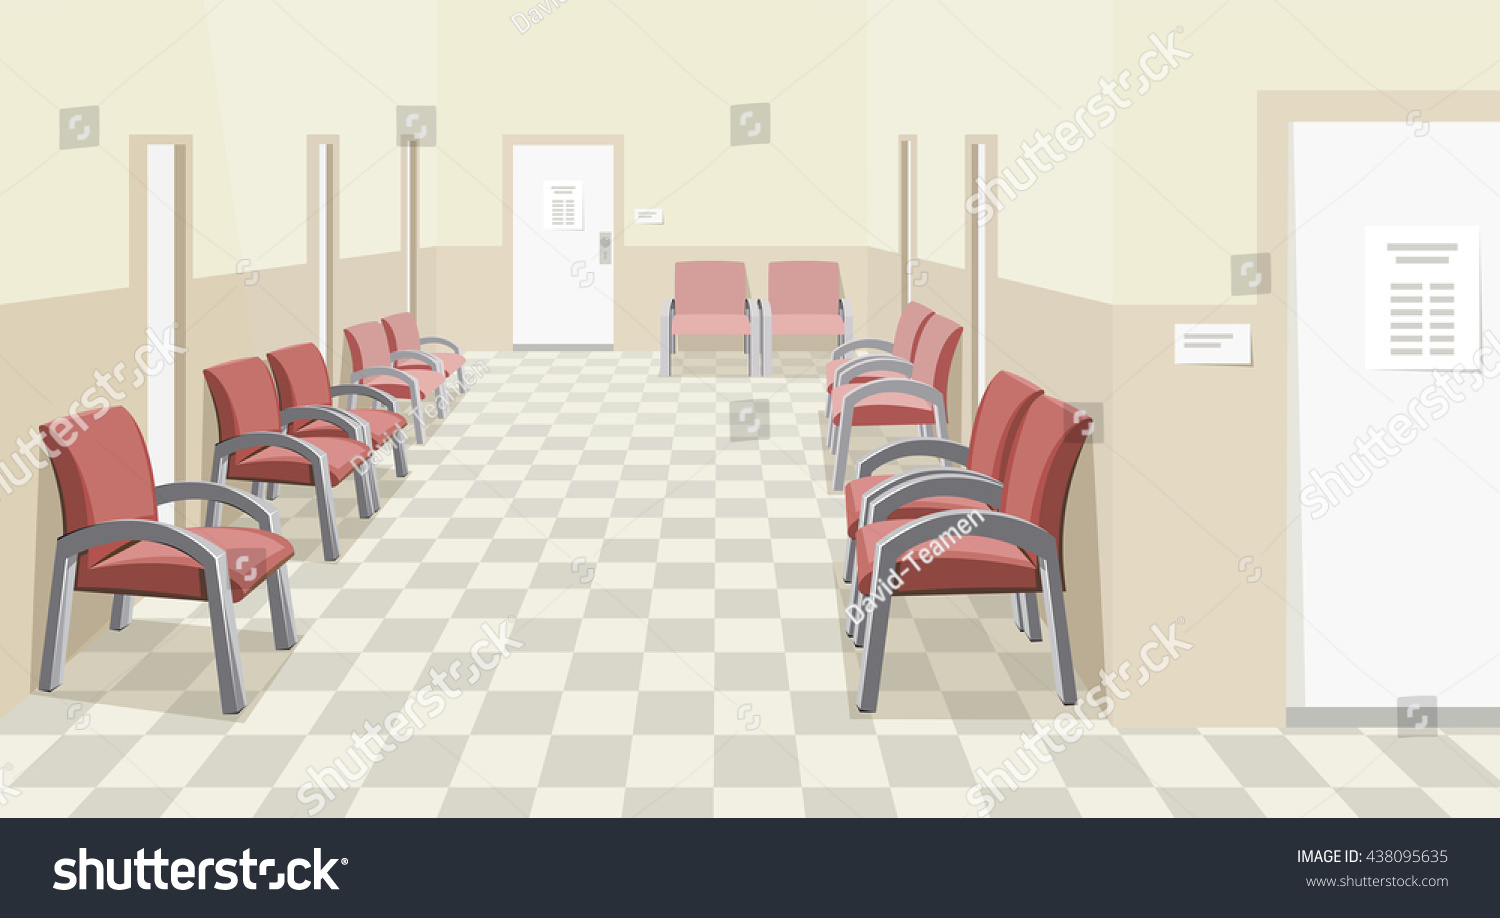 Doctor waiting room